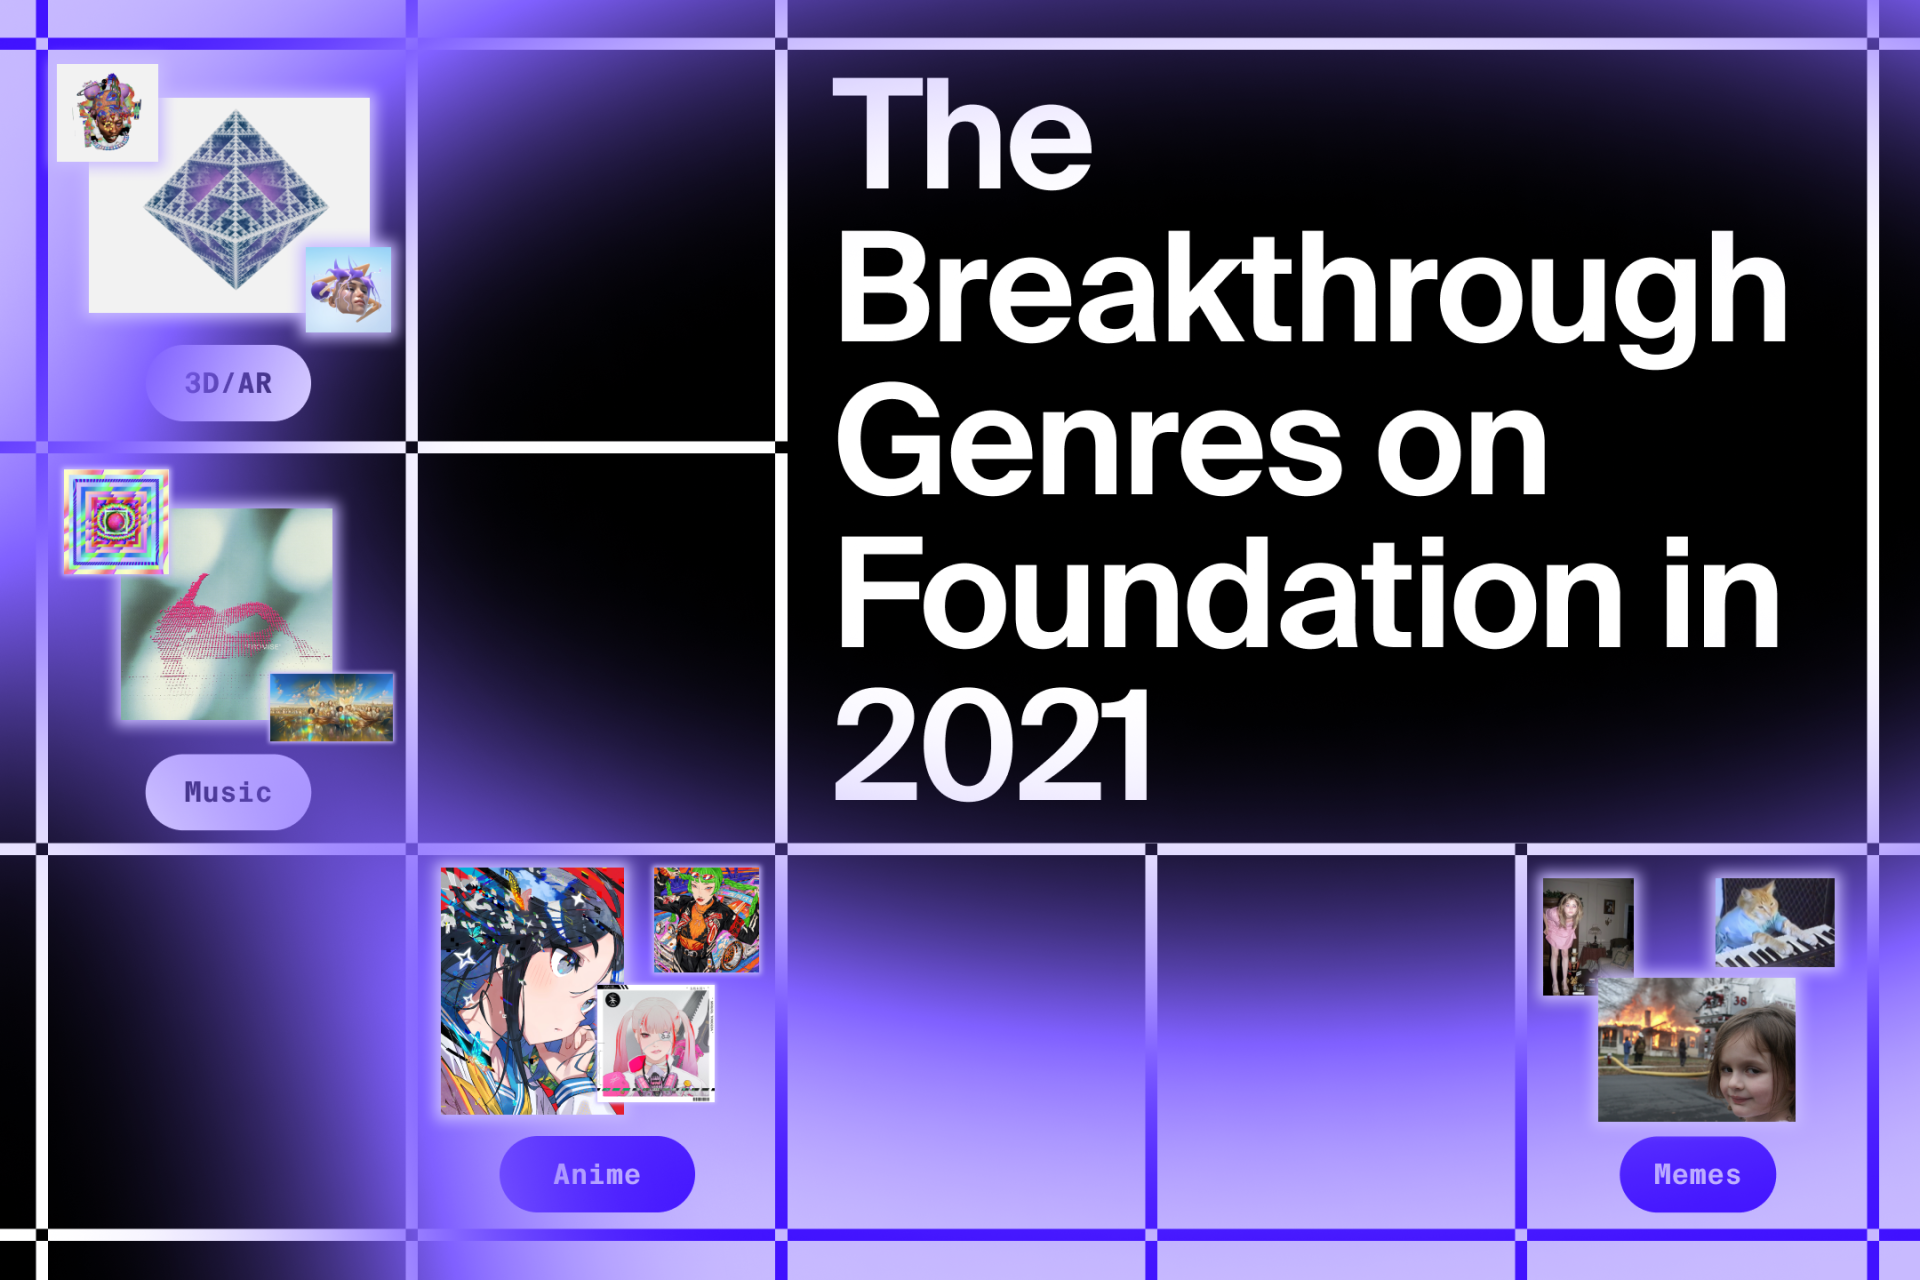 The Breakthrough Genres on Foundation in 2021